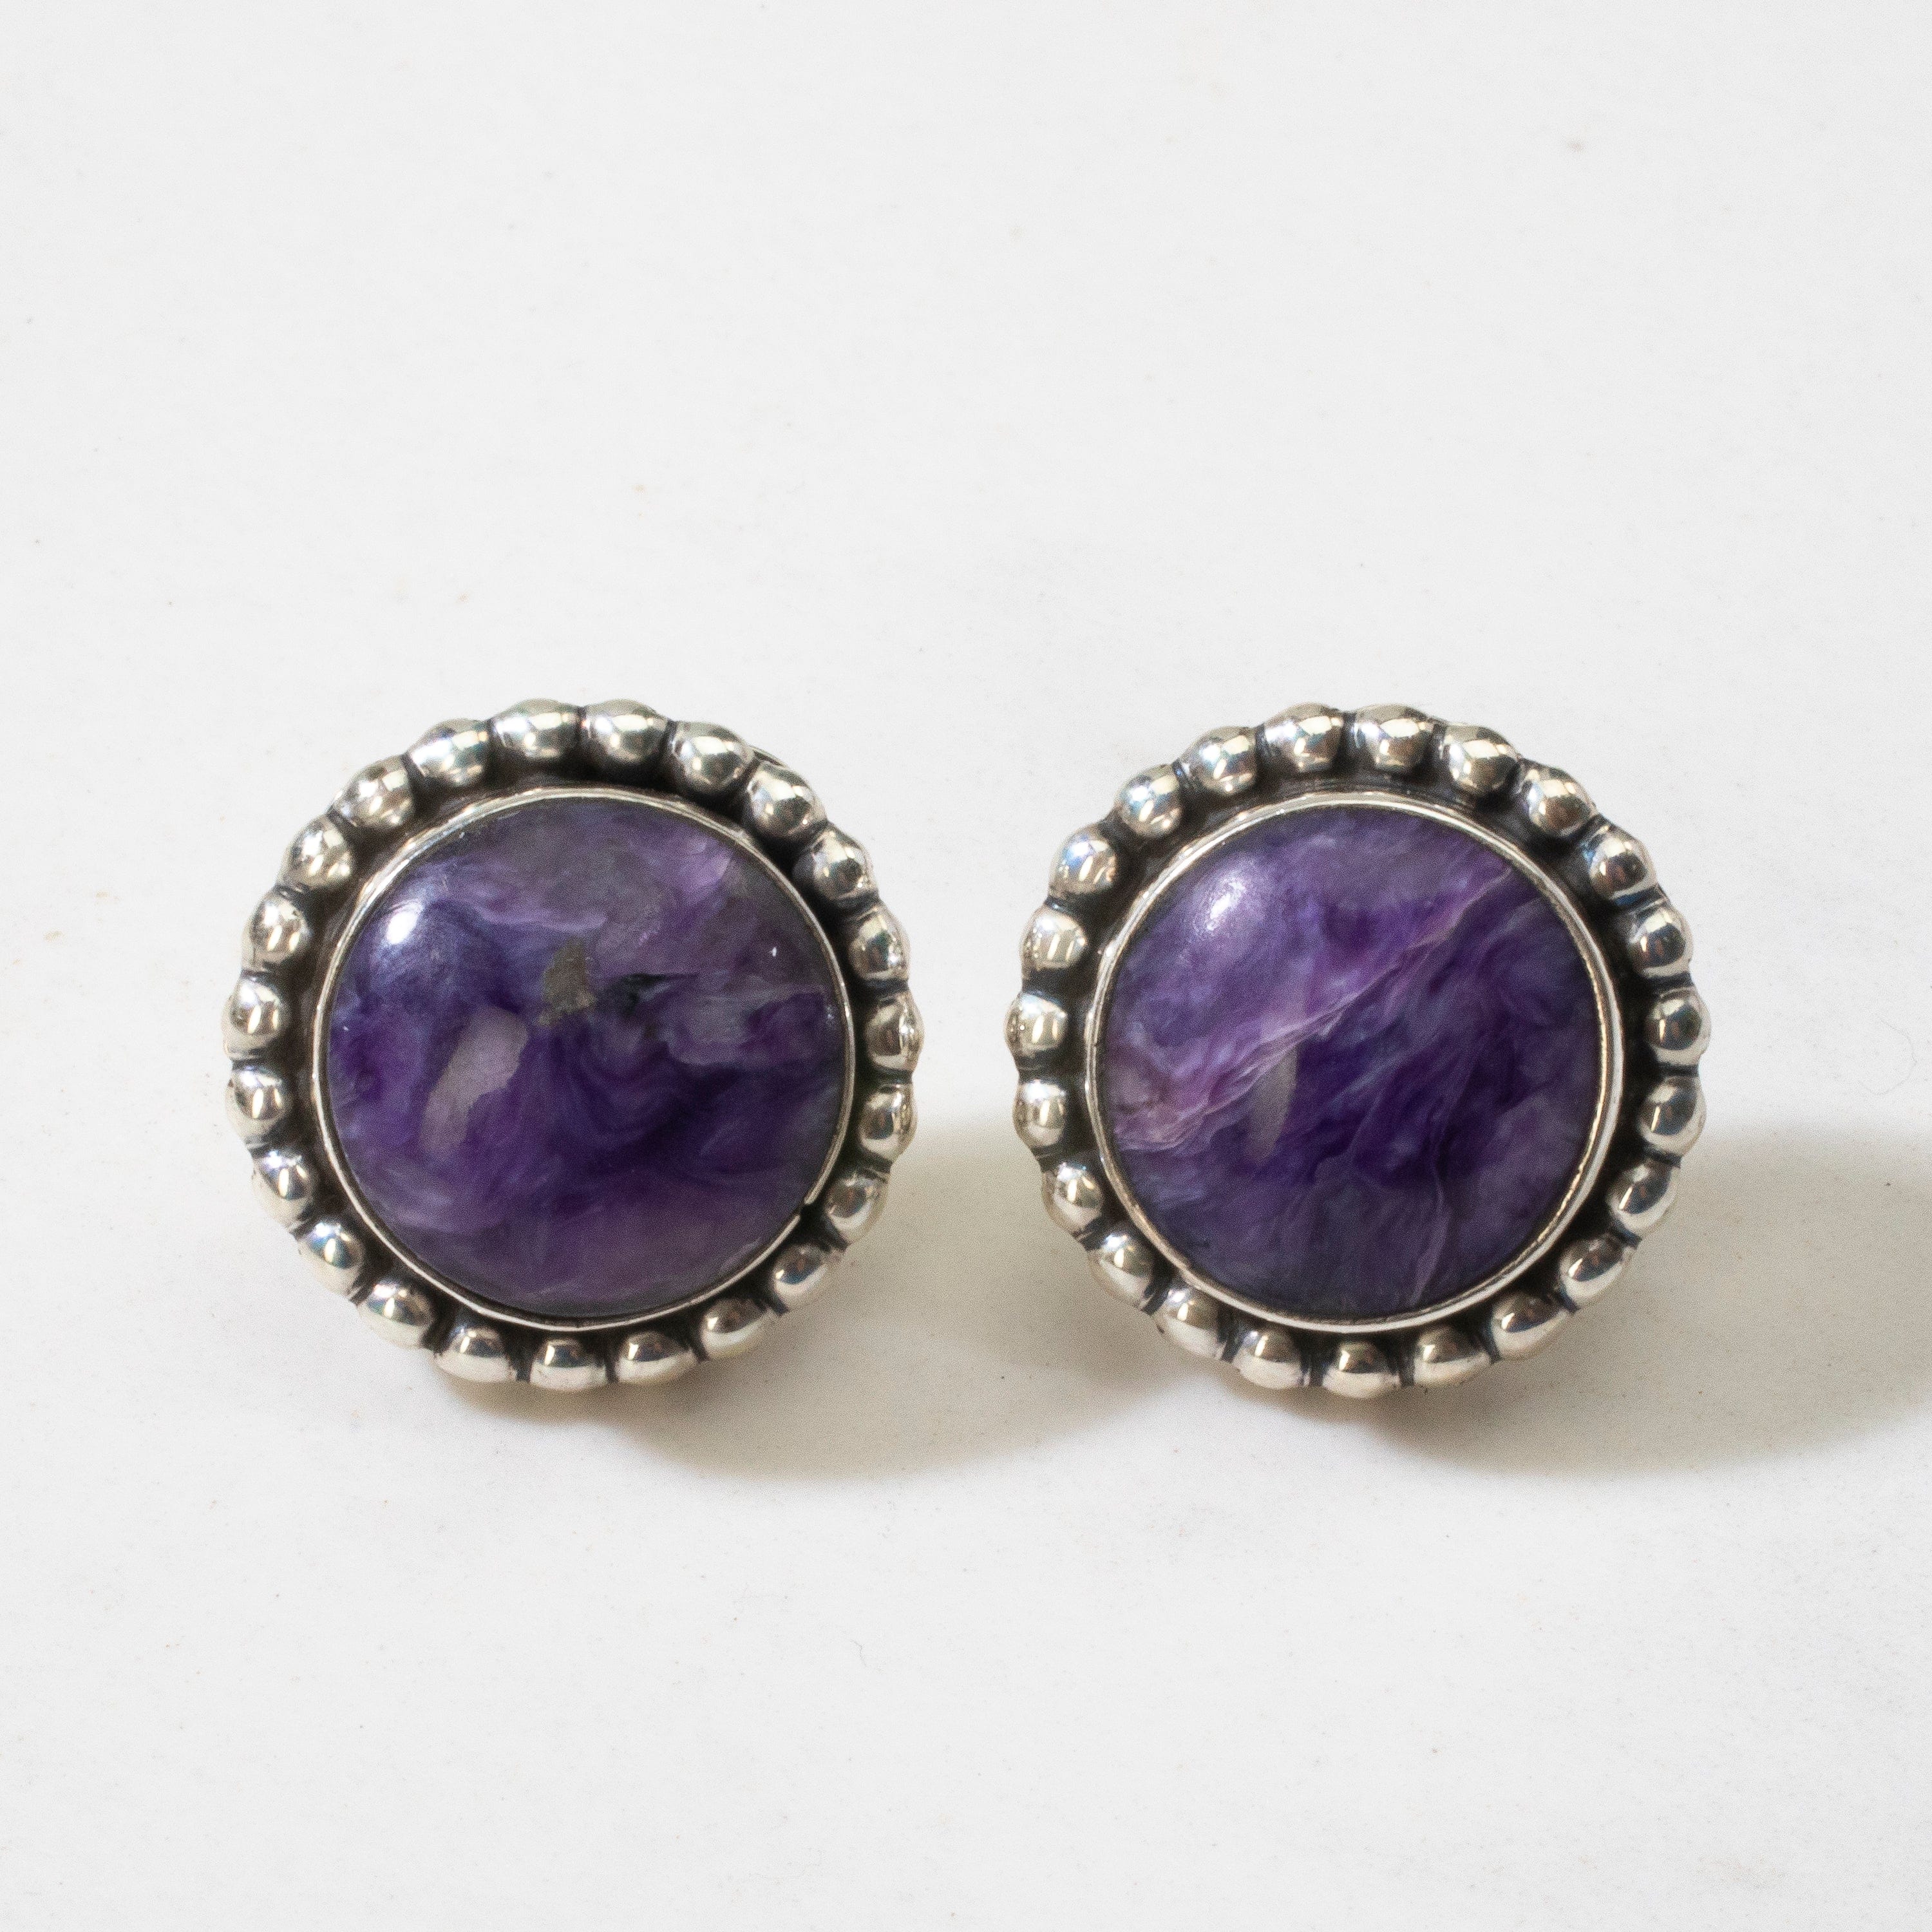 Kalifano Native American Jewelry Charoite Round Navajo USA Native American Made 925 Sterling Silver Earrings with Stud Backing NAE400.038